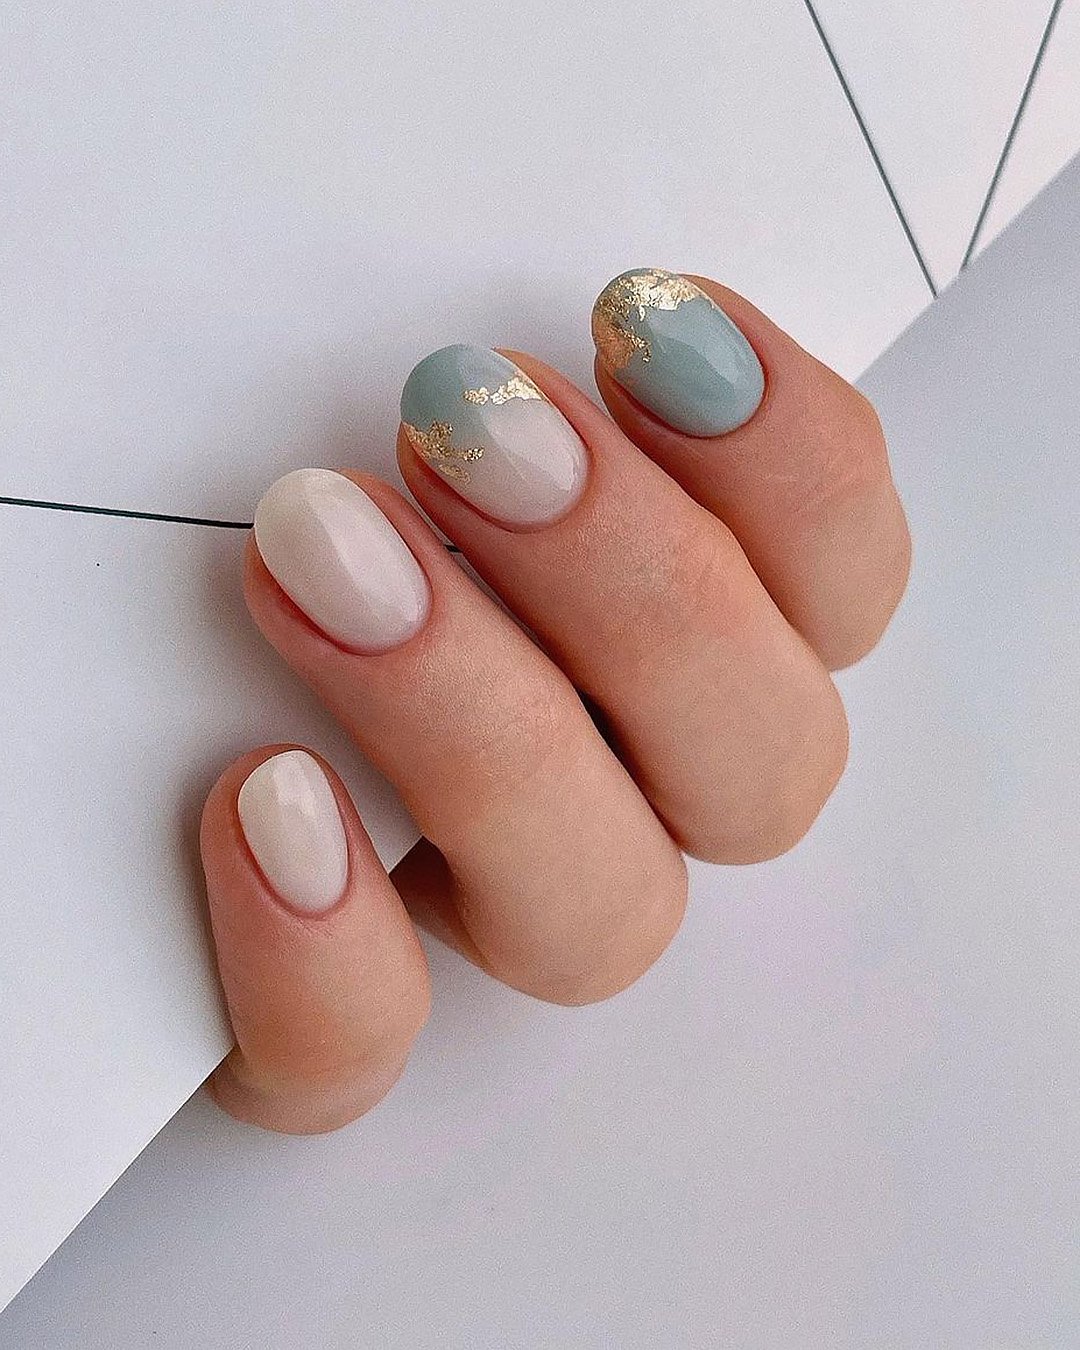 nail ideas wedding manicure nude and blue ombre nails with golden foil kangannynails